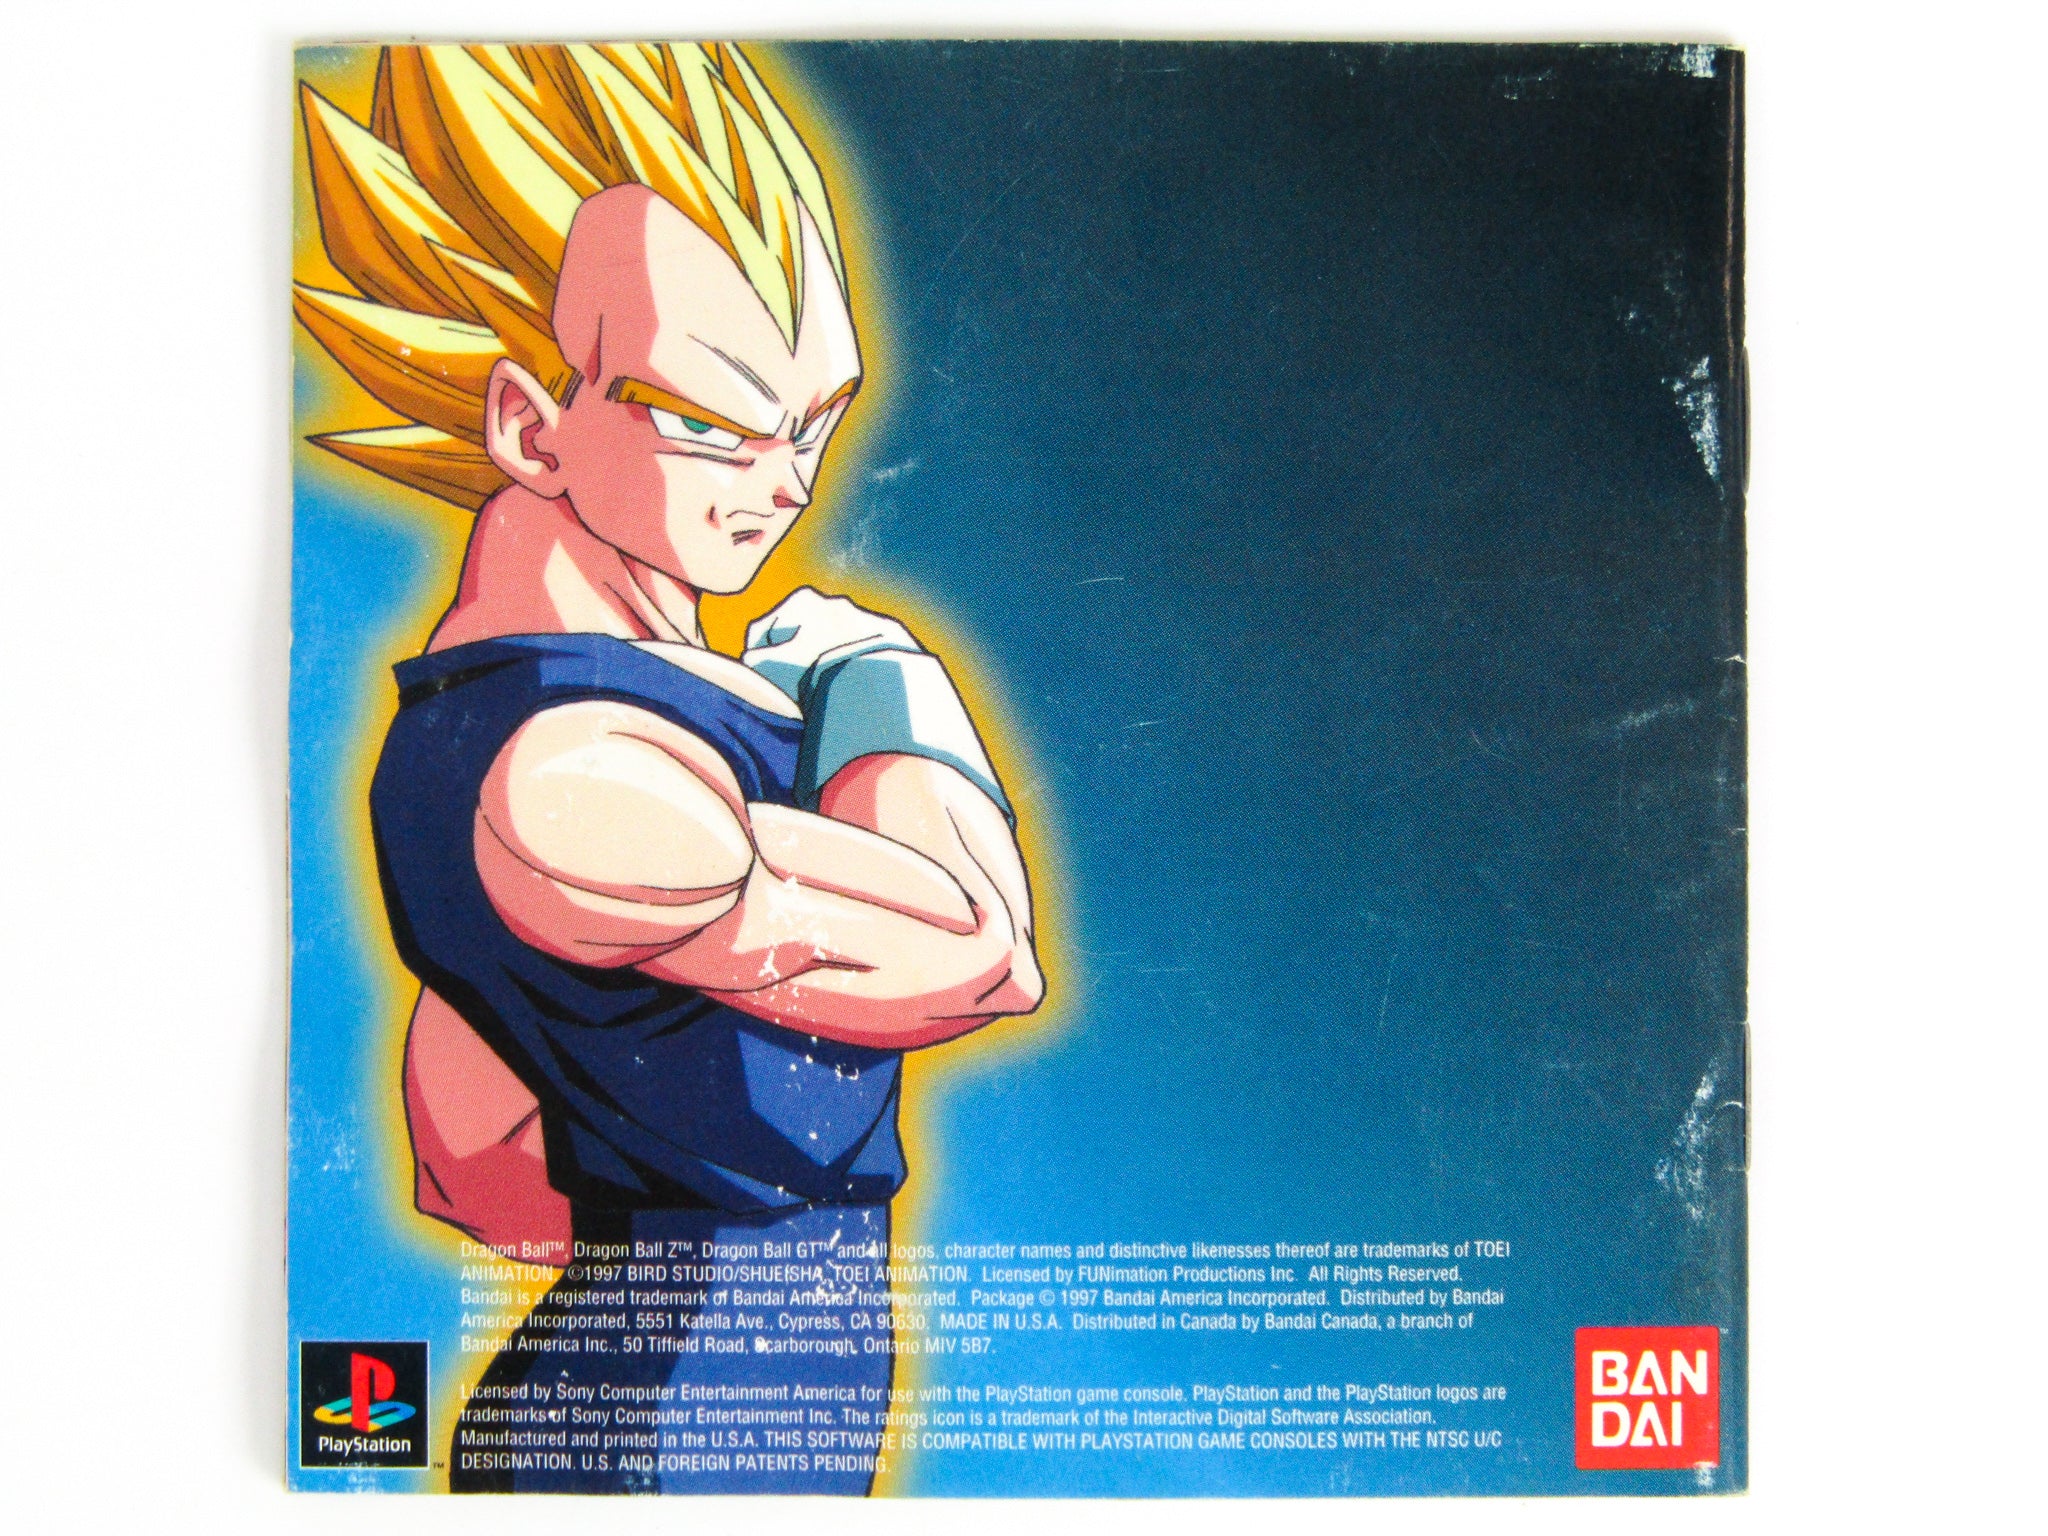 RETRO REBOOT - Dragonball GT Final Bout (PlayStation) - Game Fix